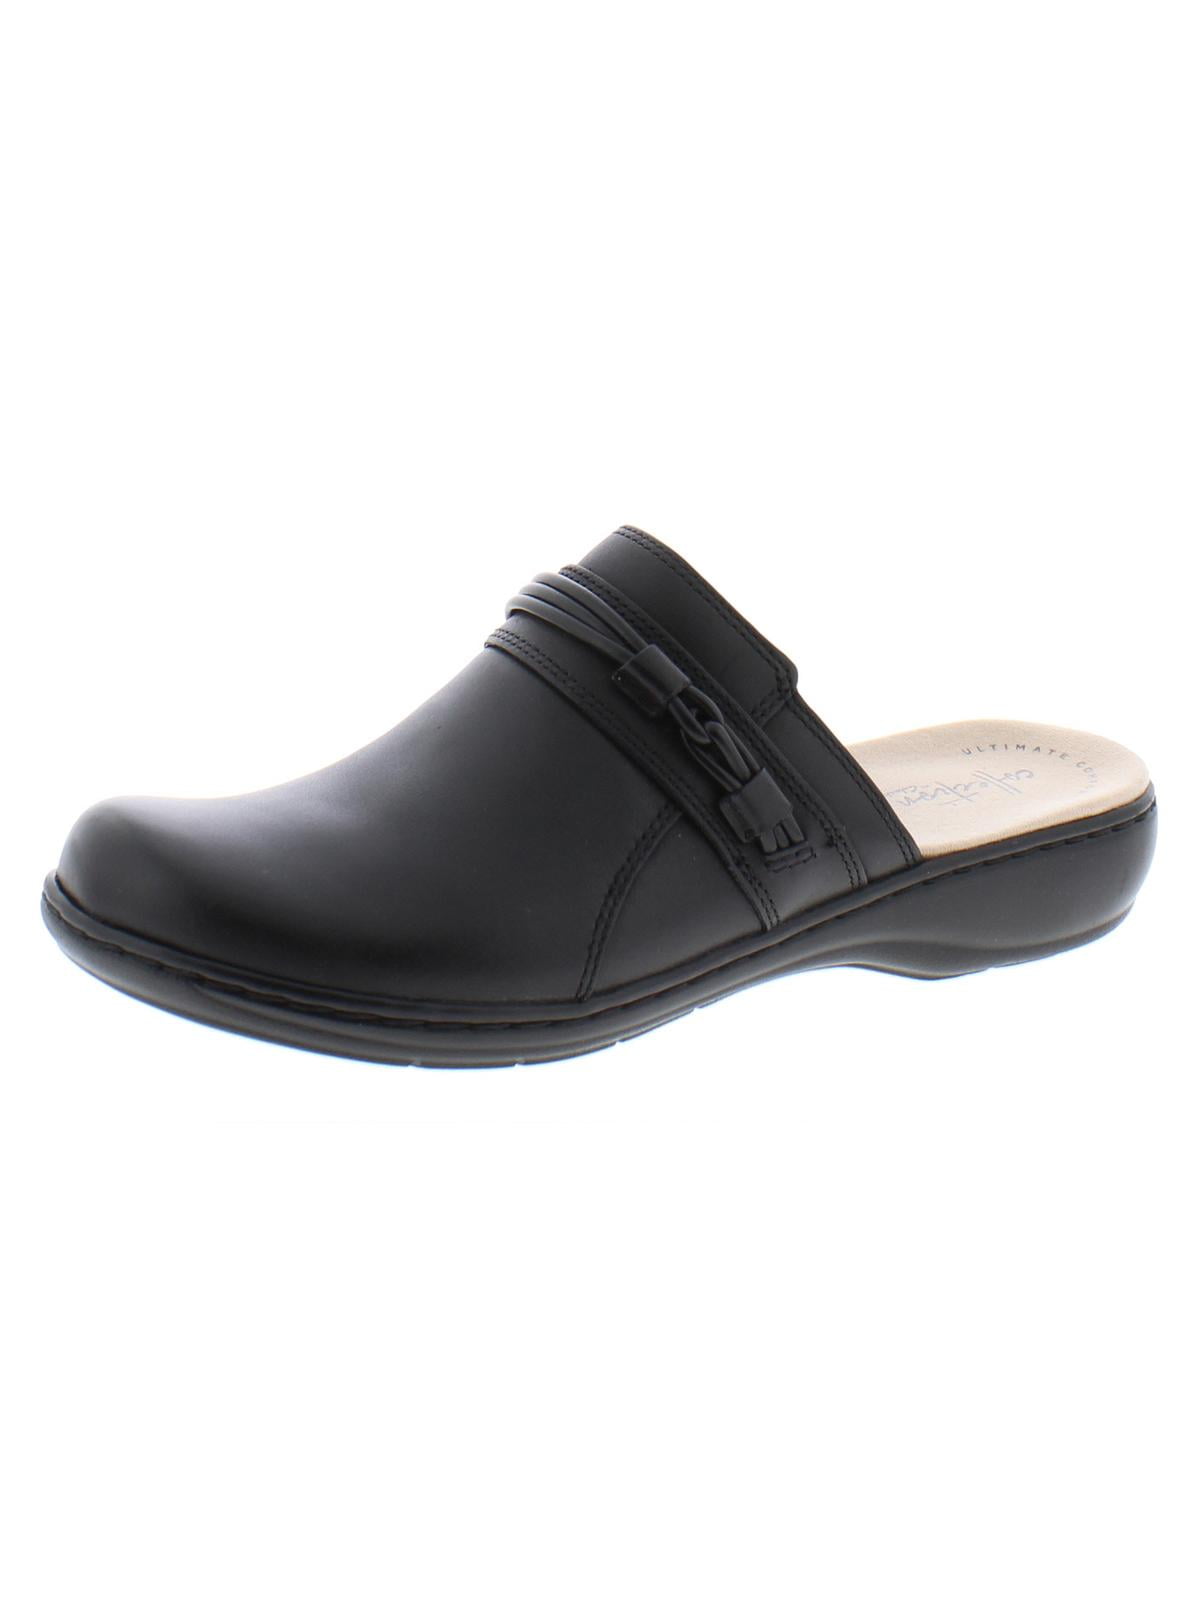 Clarks Womens Leisa Clover Leather Slip On Mules Black 9.5 Wide (C,D,W ...